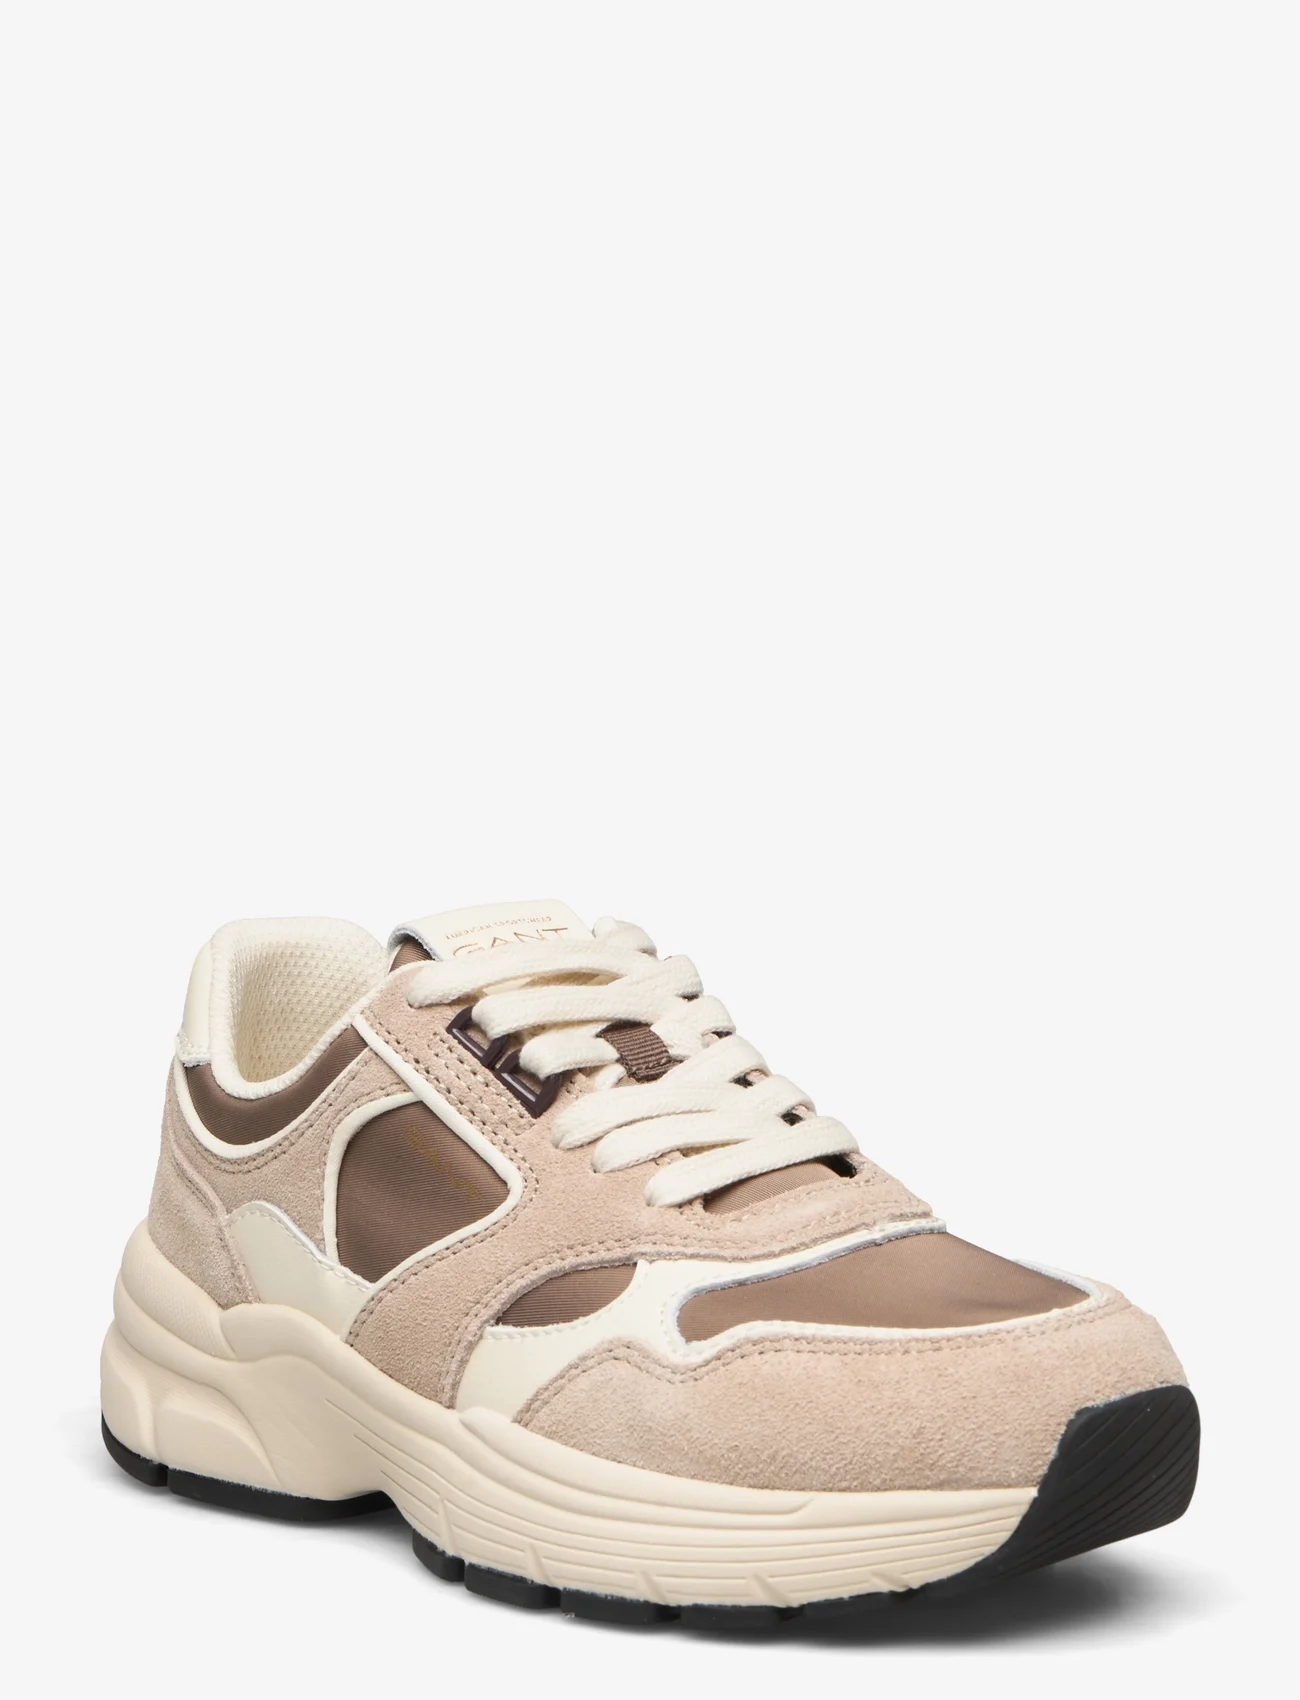 GANT - Neuwill Sneaker - lave sneakers - taupe/brown - 0